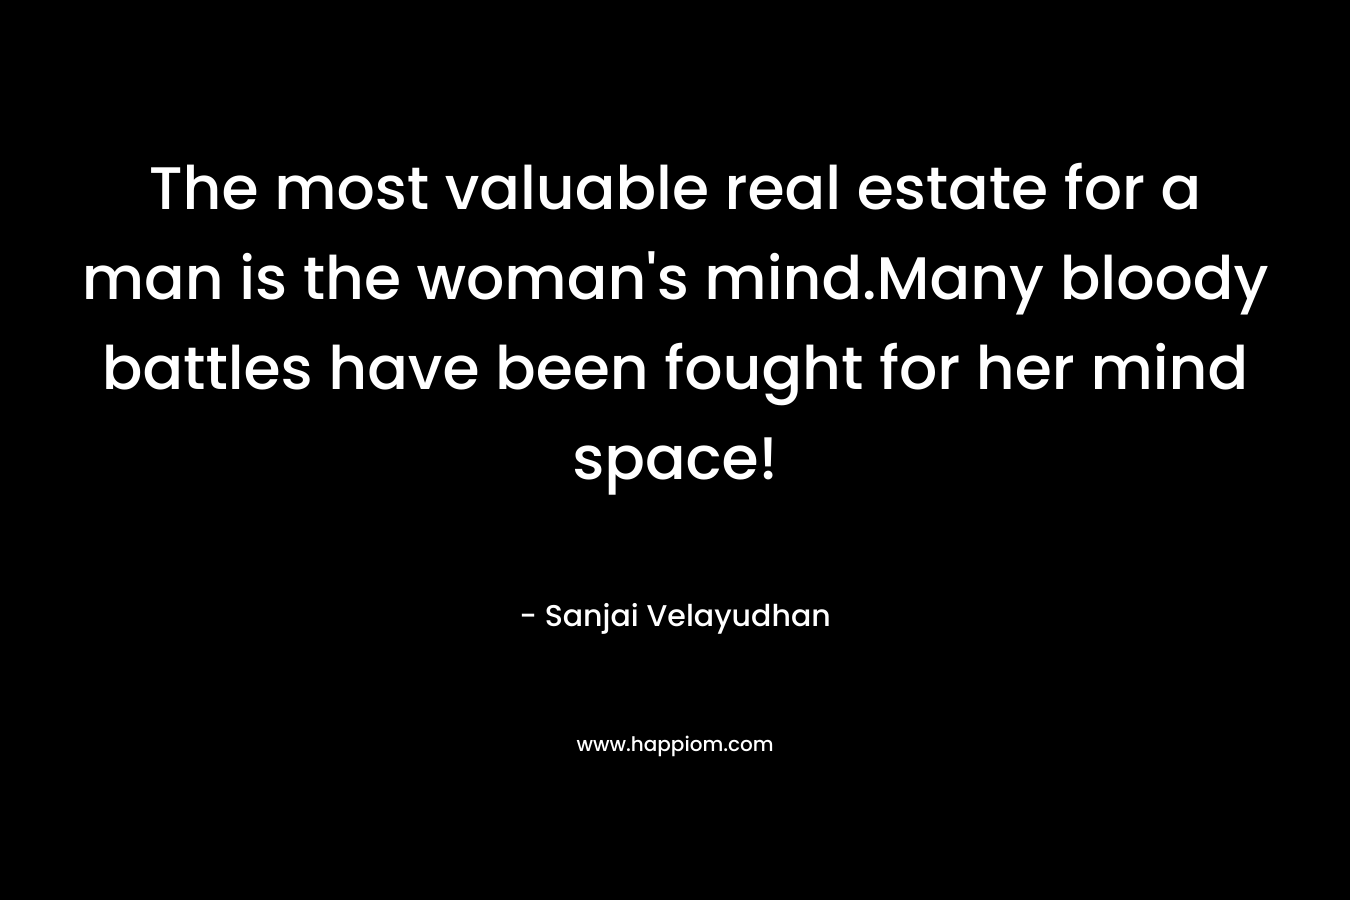 The most valuable real estate for a man is the woman’s mind.Many bloody battles have been fought for her mind space! – Sanjai Velayudhan